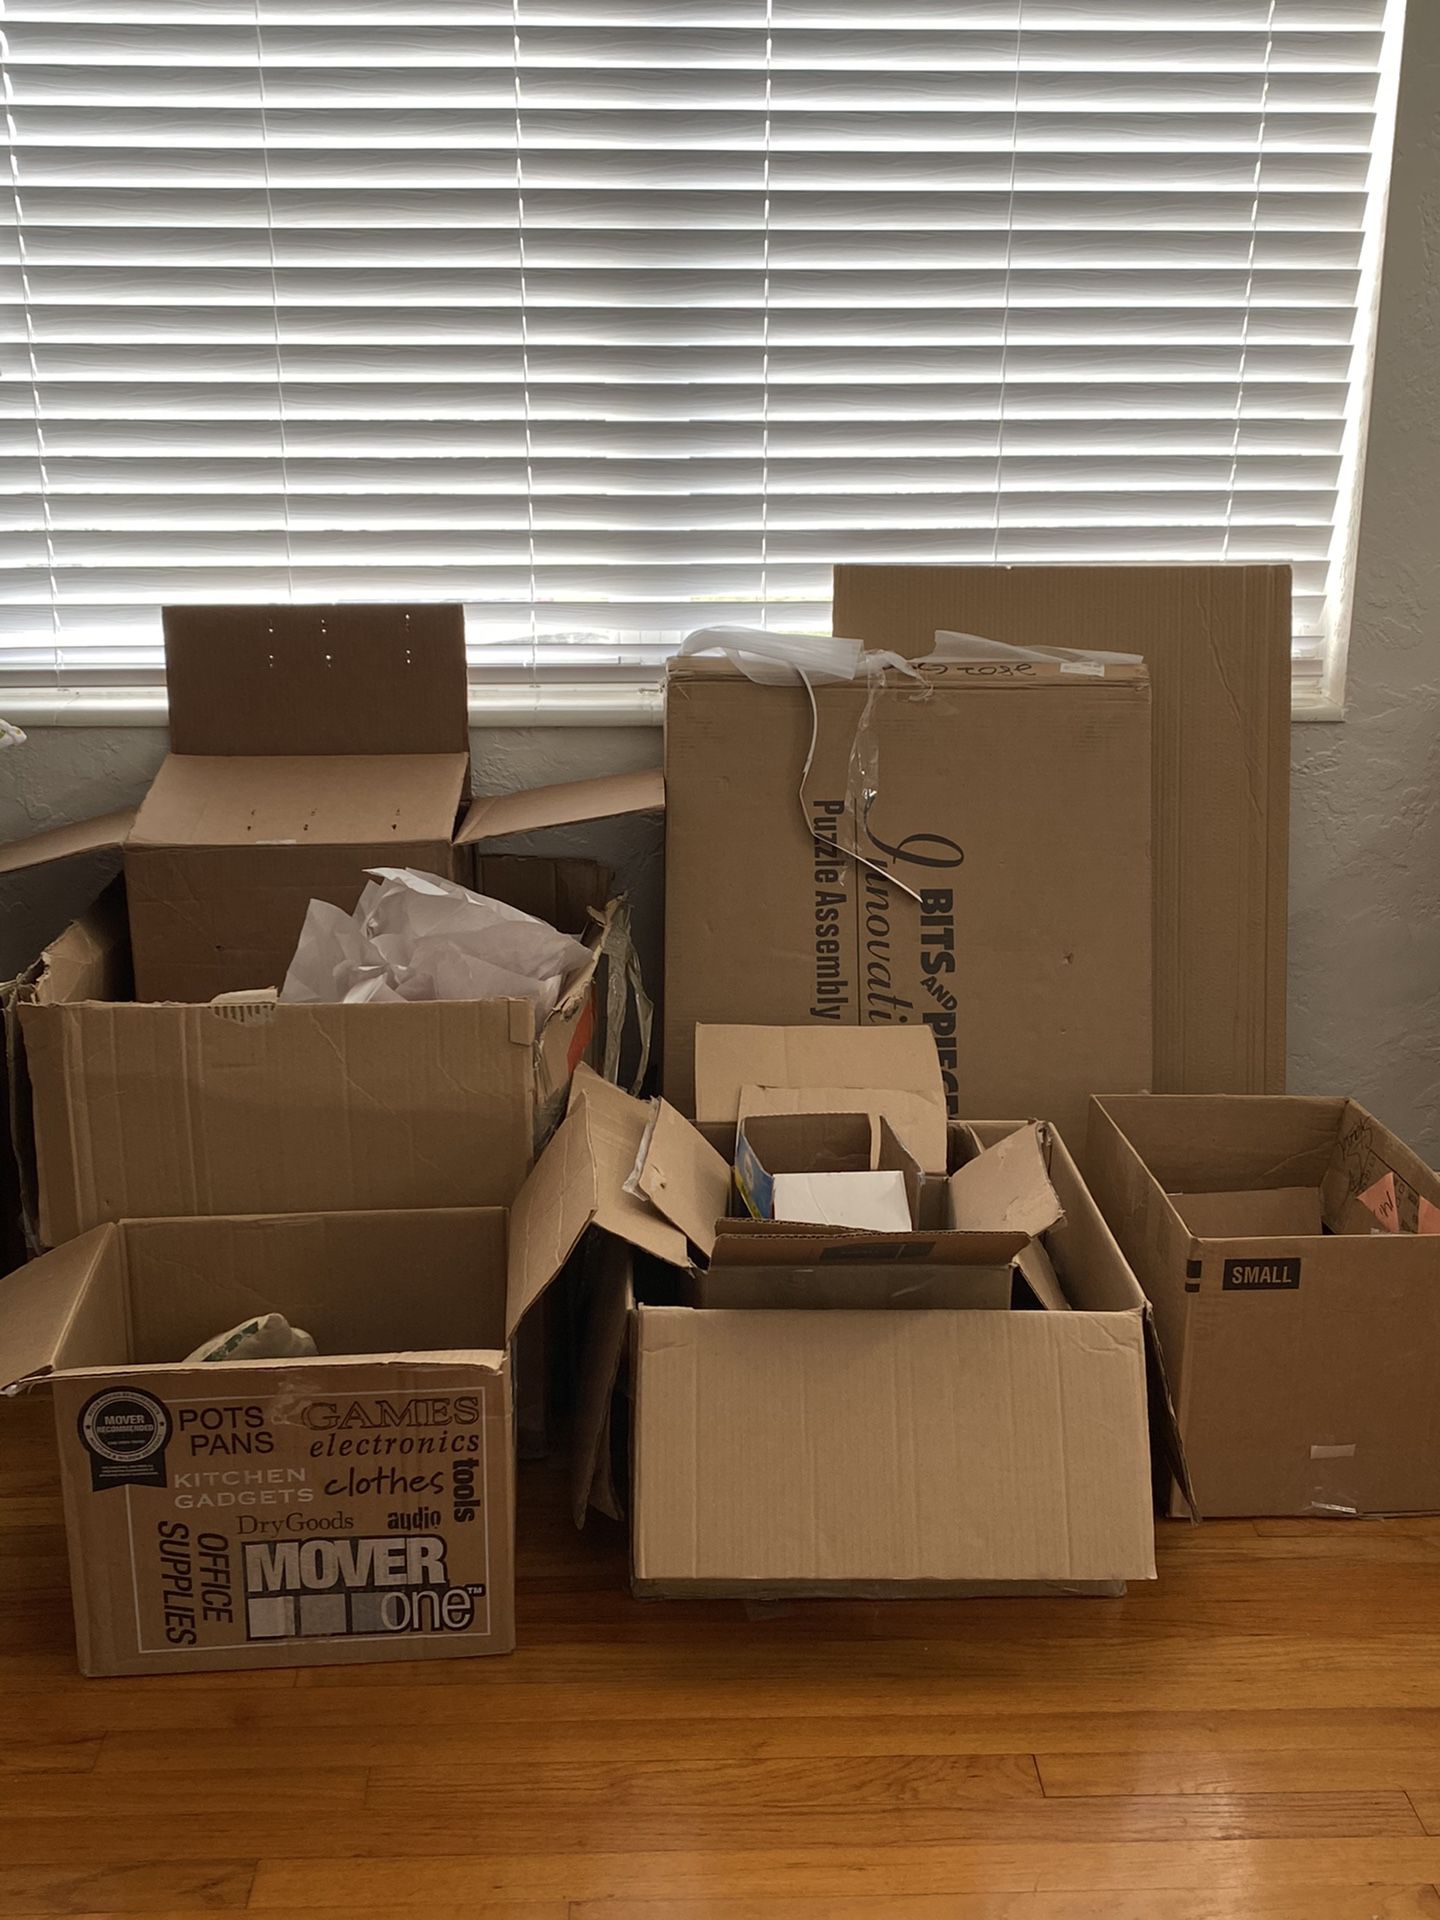 Free Boxes - more than in photos